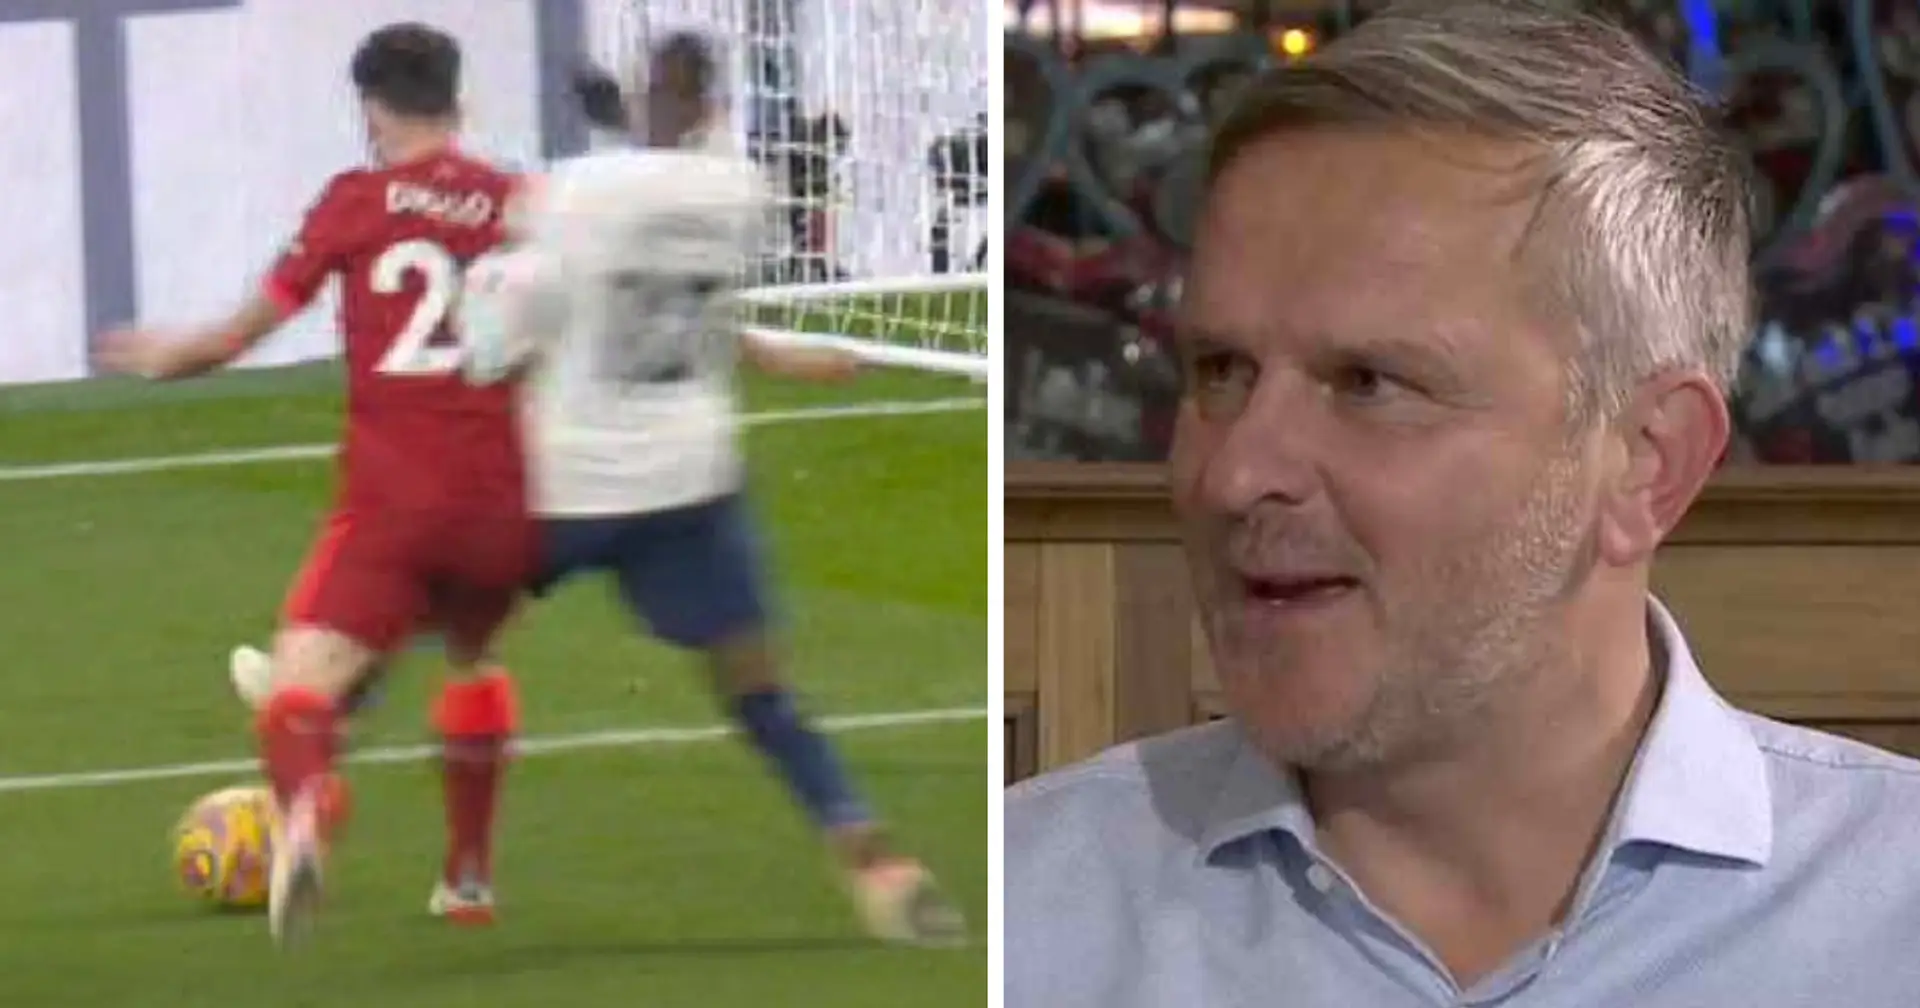 'Come on Didi': Hamann insists Jota non-penalty call correct, ex-Spurs player tries to bring him to senses